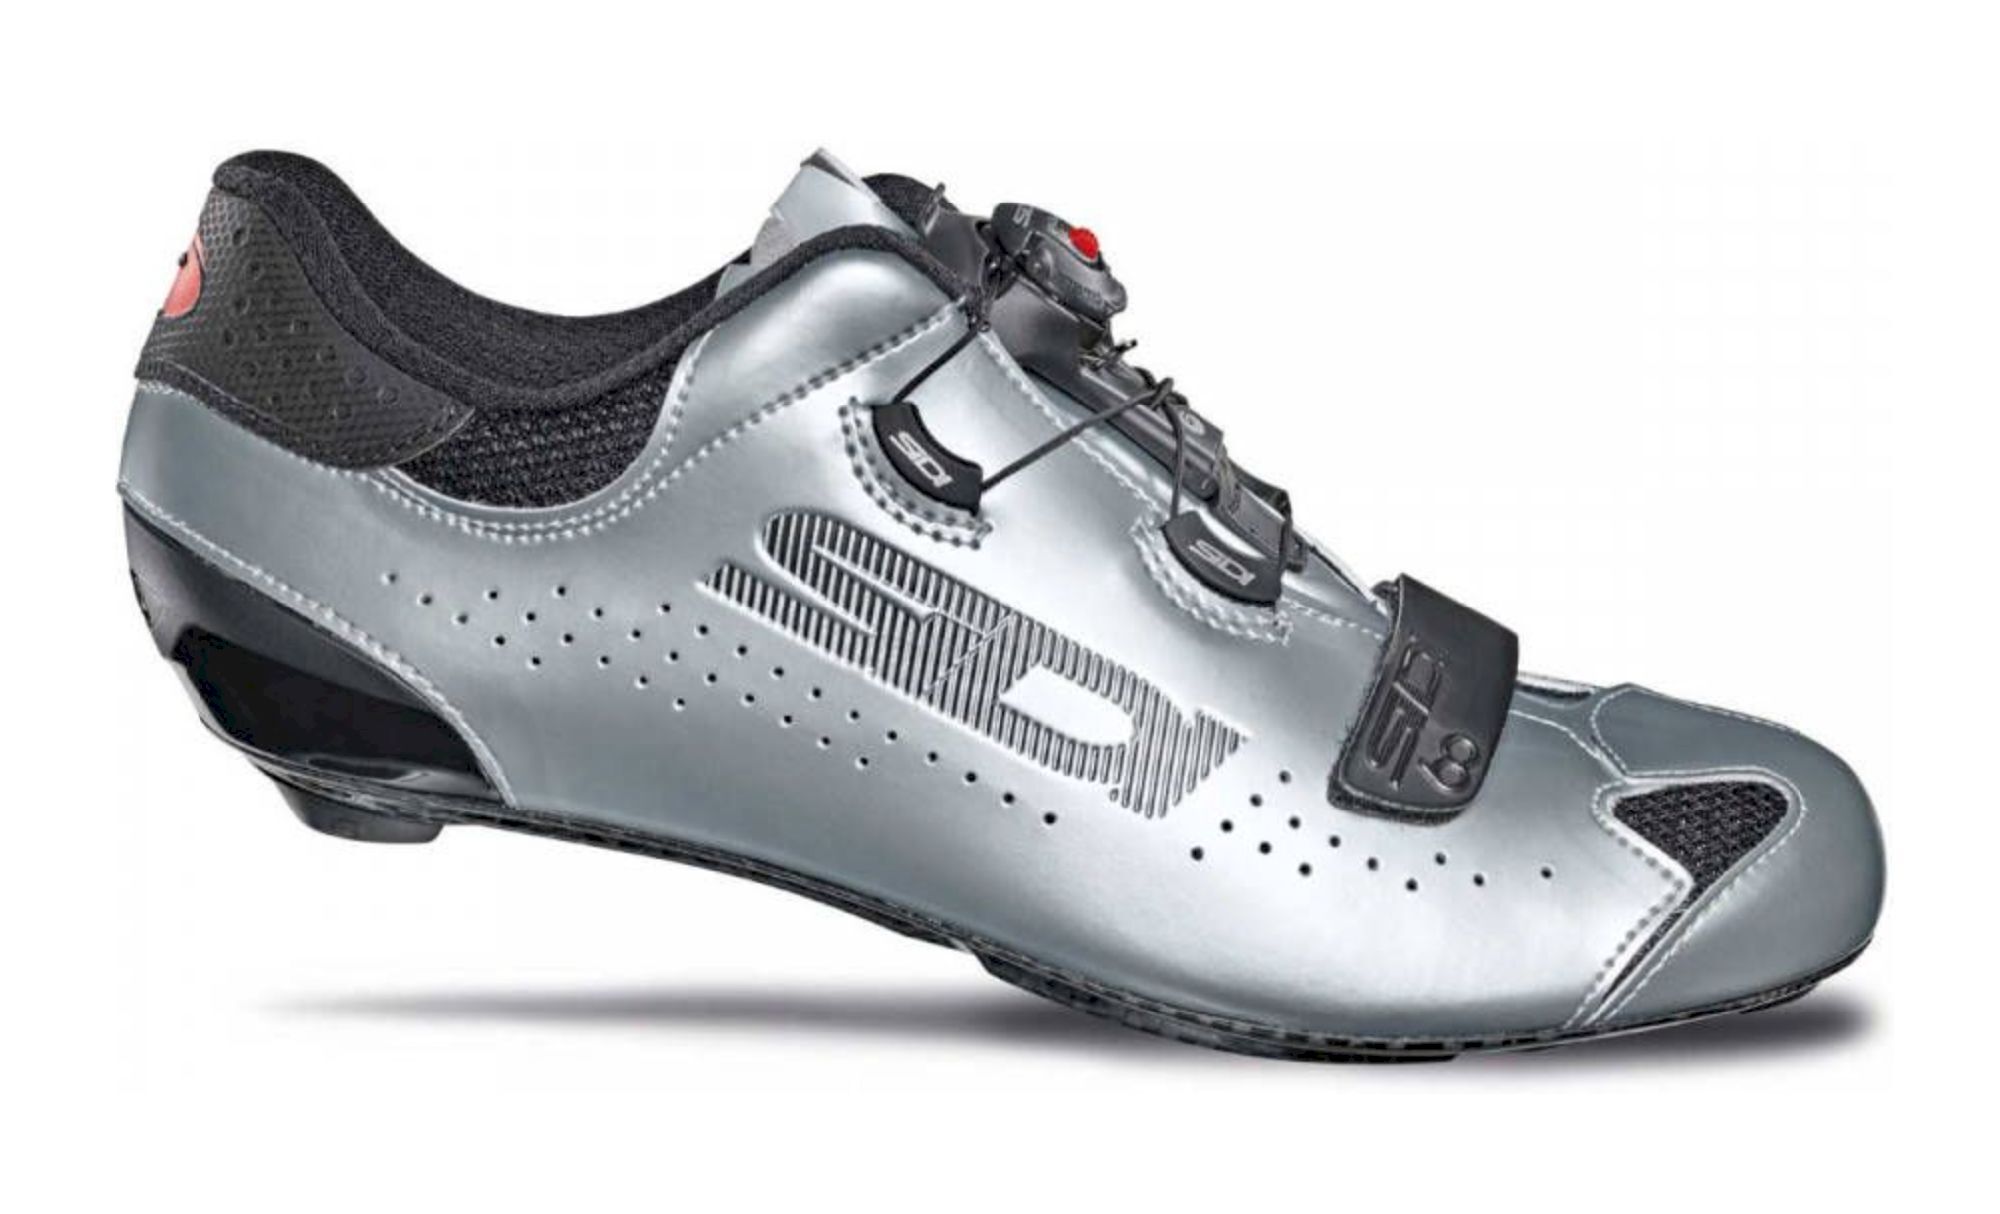 Sidi Sixty Limited Edition - Chaussures vélo de route | Hardloop